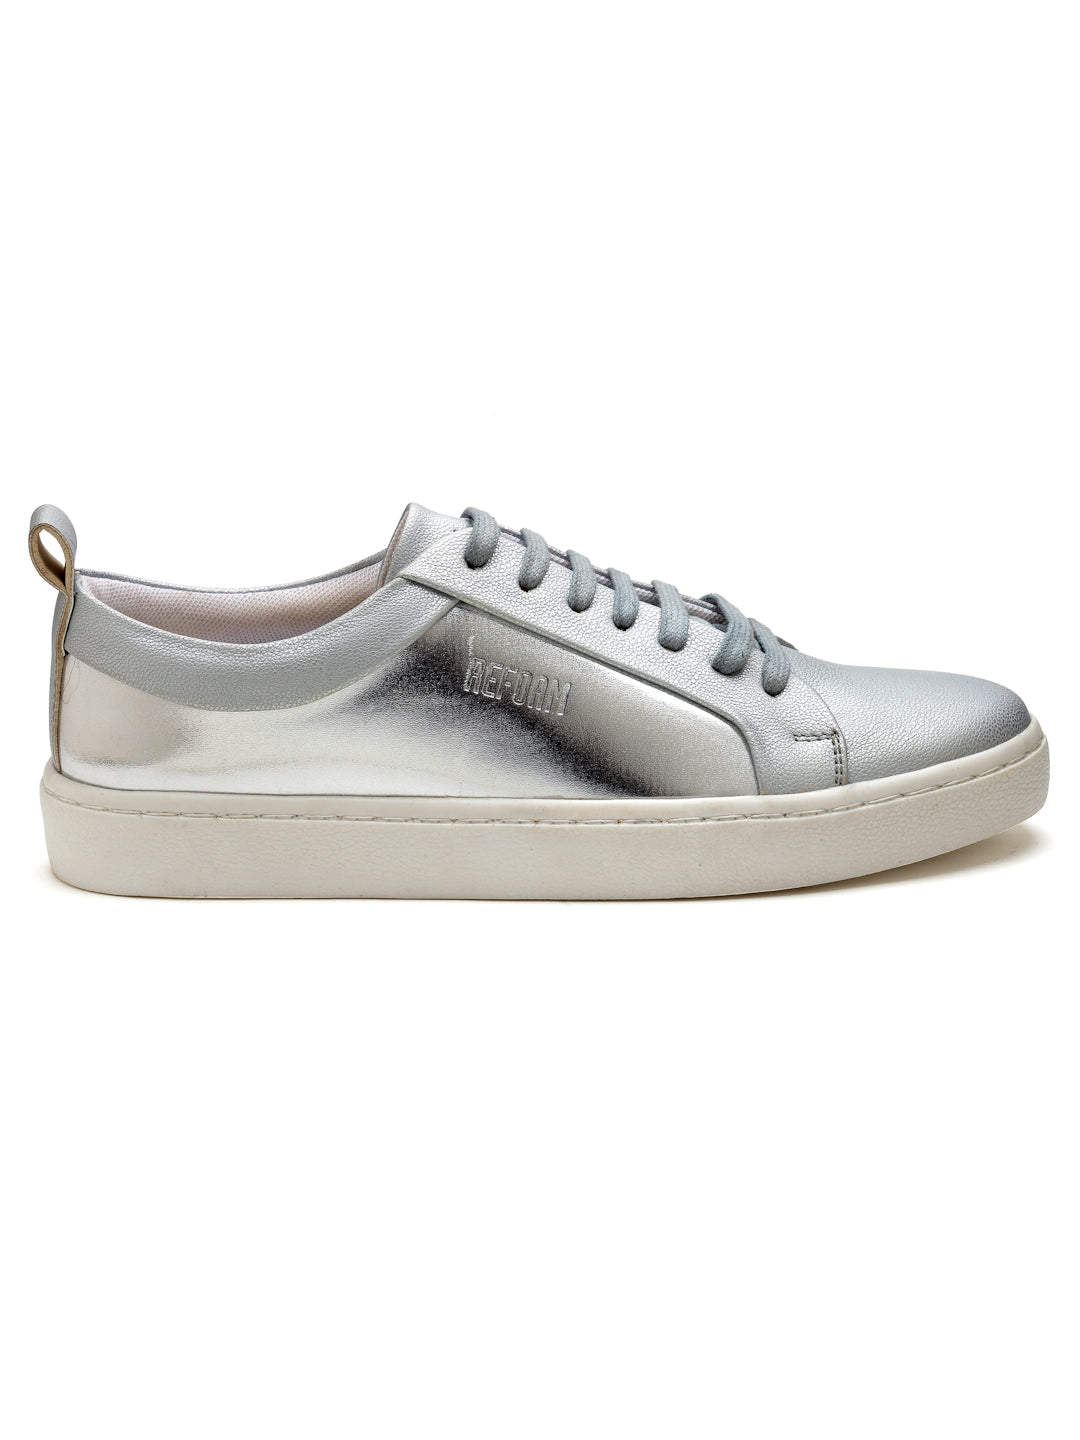 Women's Silver Synthetic Leather Lace up Casual Sneaker